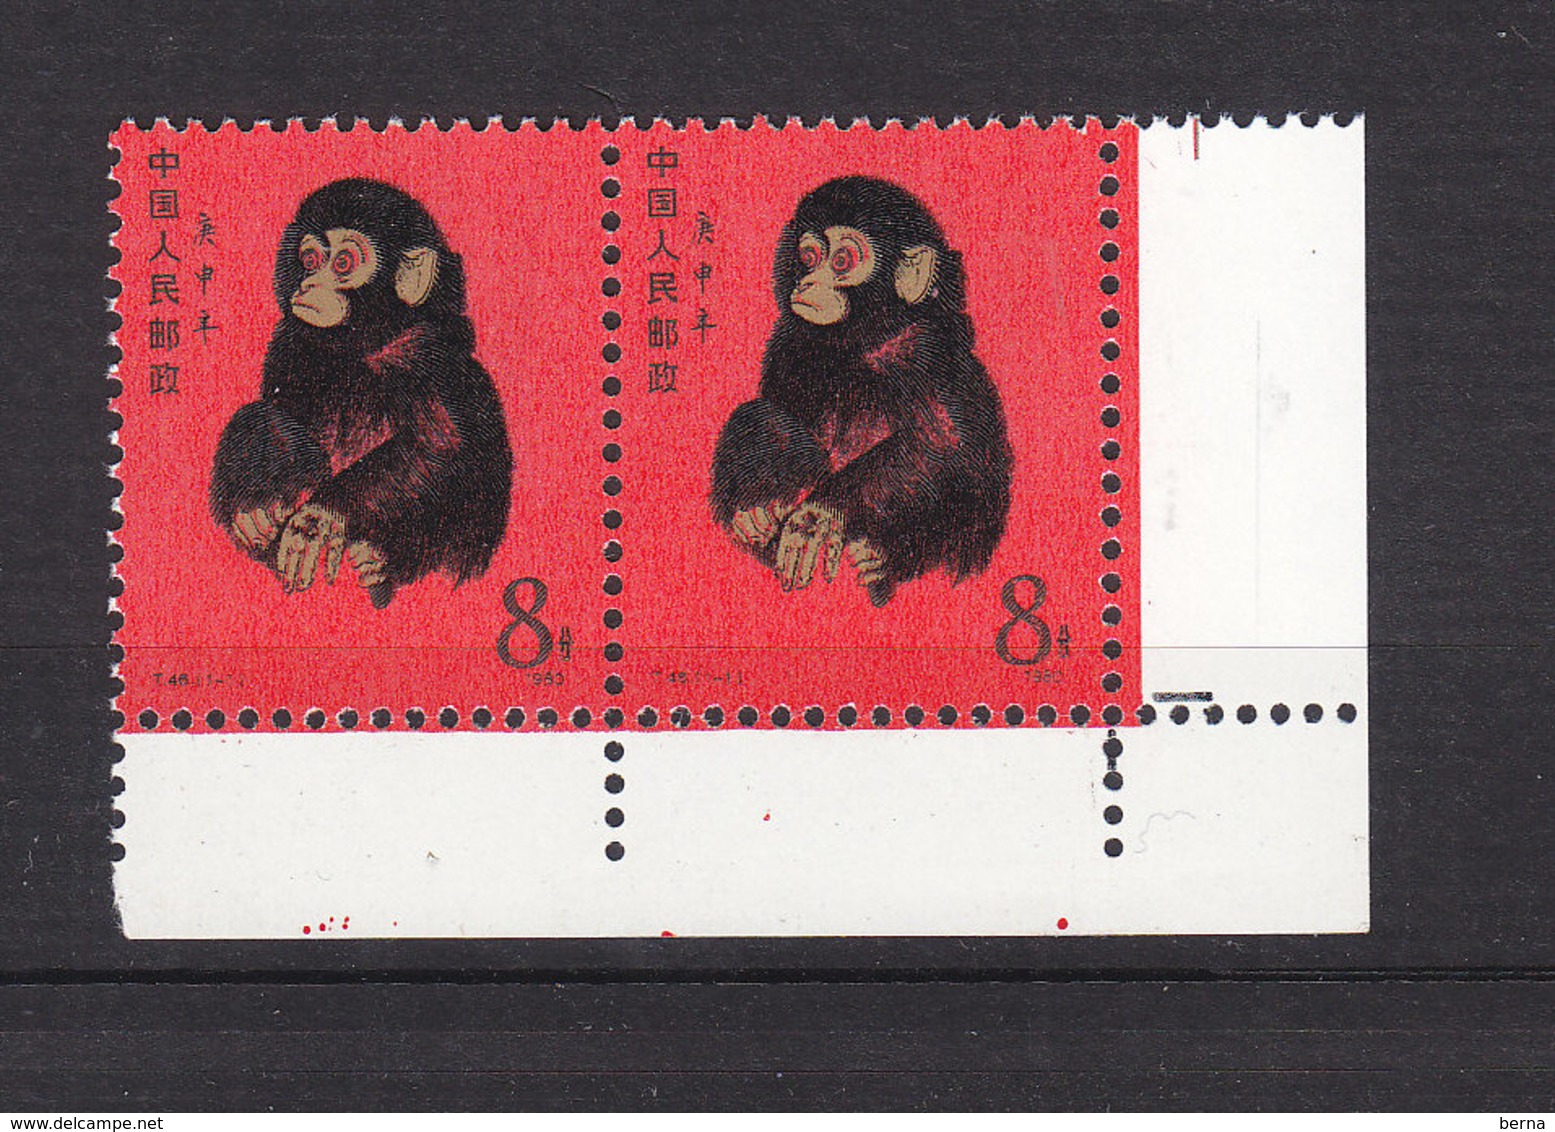 CHINA MONKEY SG 2968 PAIR CORNER SHEET NEW YEAR 1980 MNH -LIGHT BLACK MARKS AT REVERSE AS USUAL. READ SELLING CONDITIONS - Unused Stamps